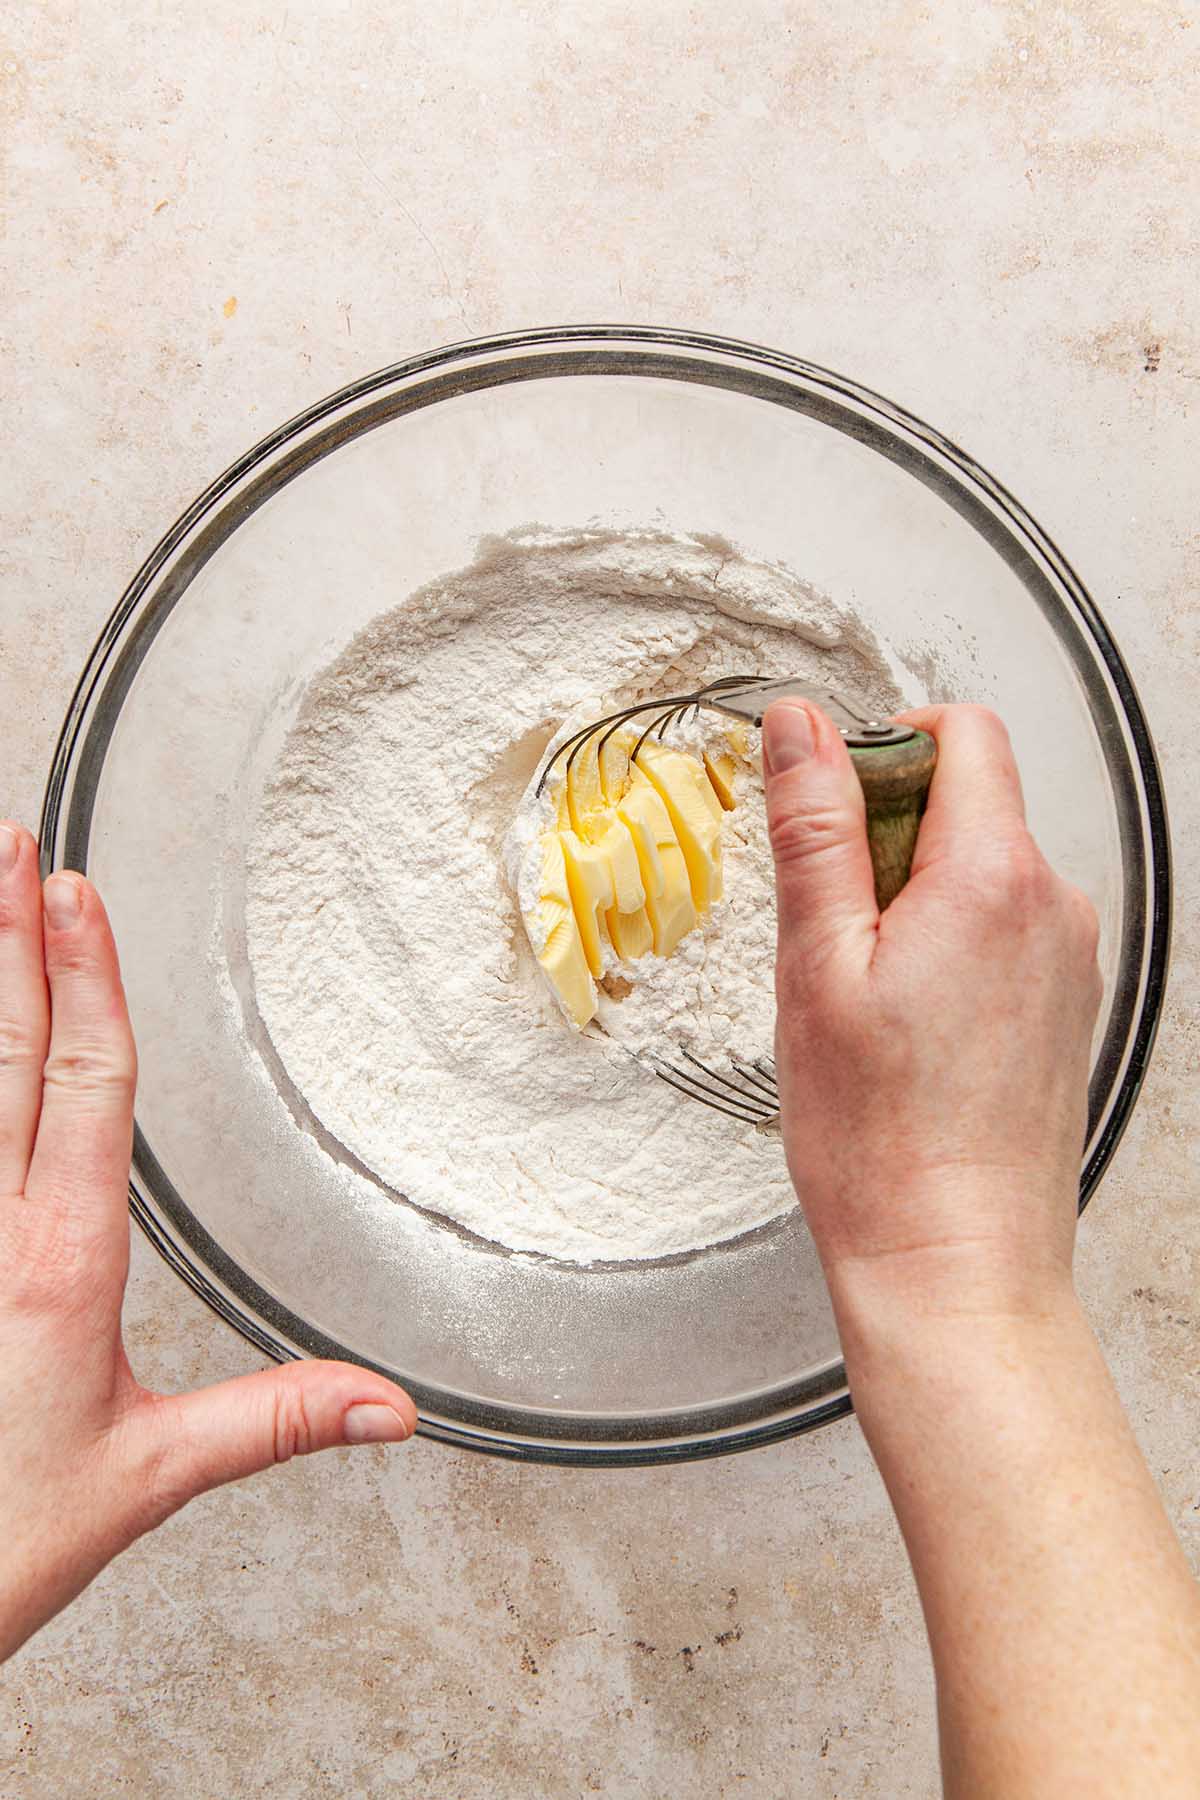 A hand holding a pastry blender, sunk into a soft chunk of butter, about to mix the butter into a bowl of flour and other dry ingredients.